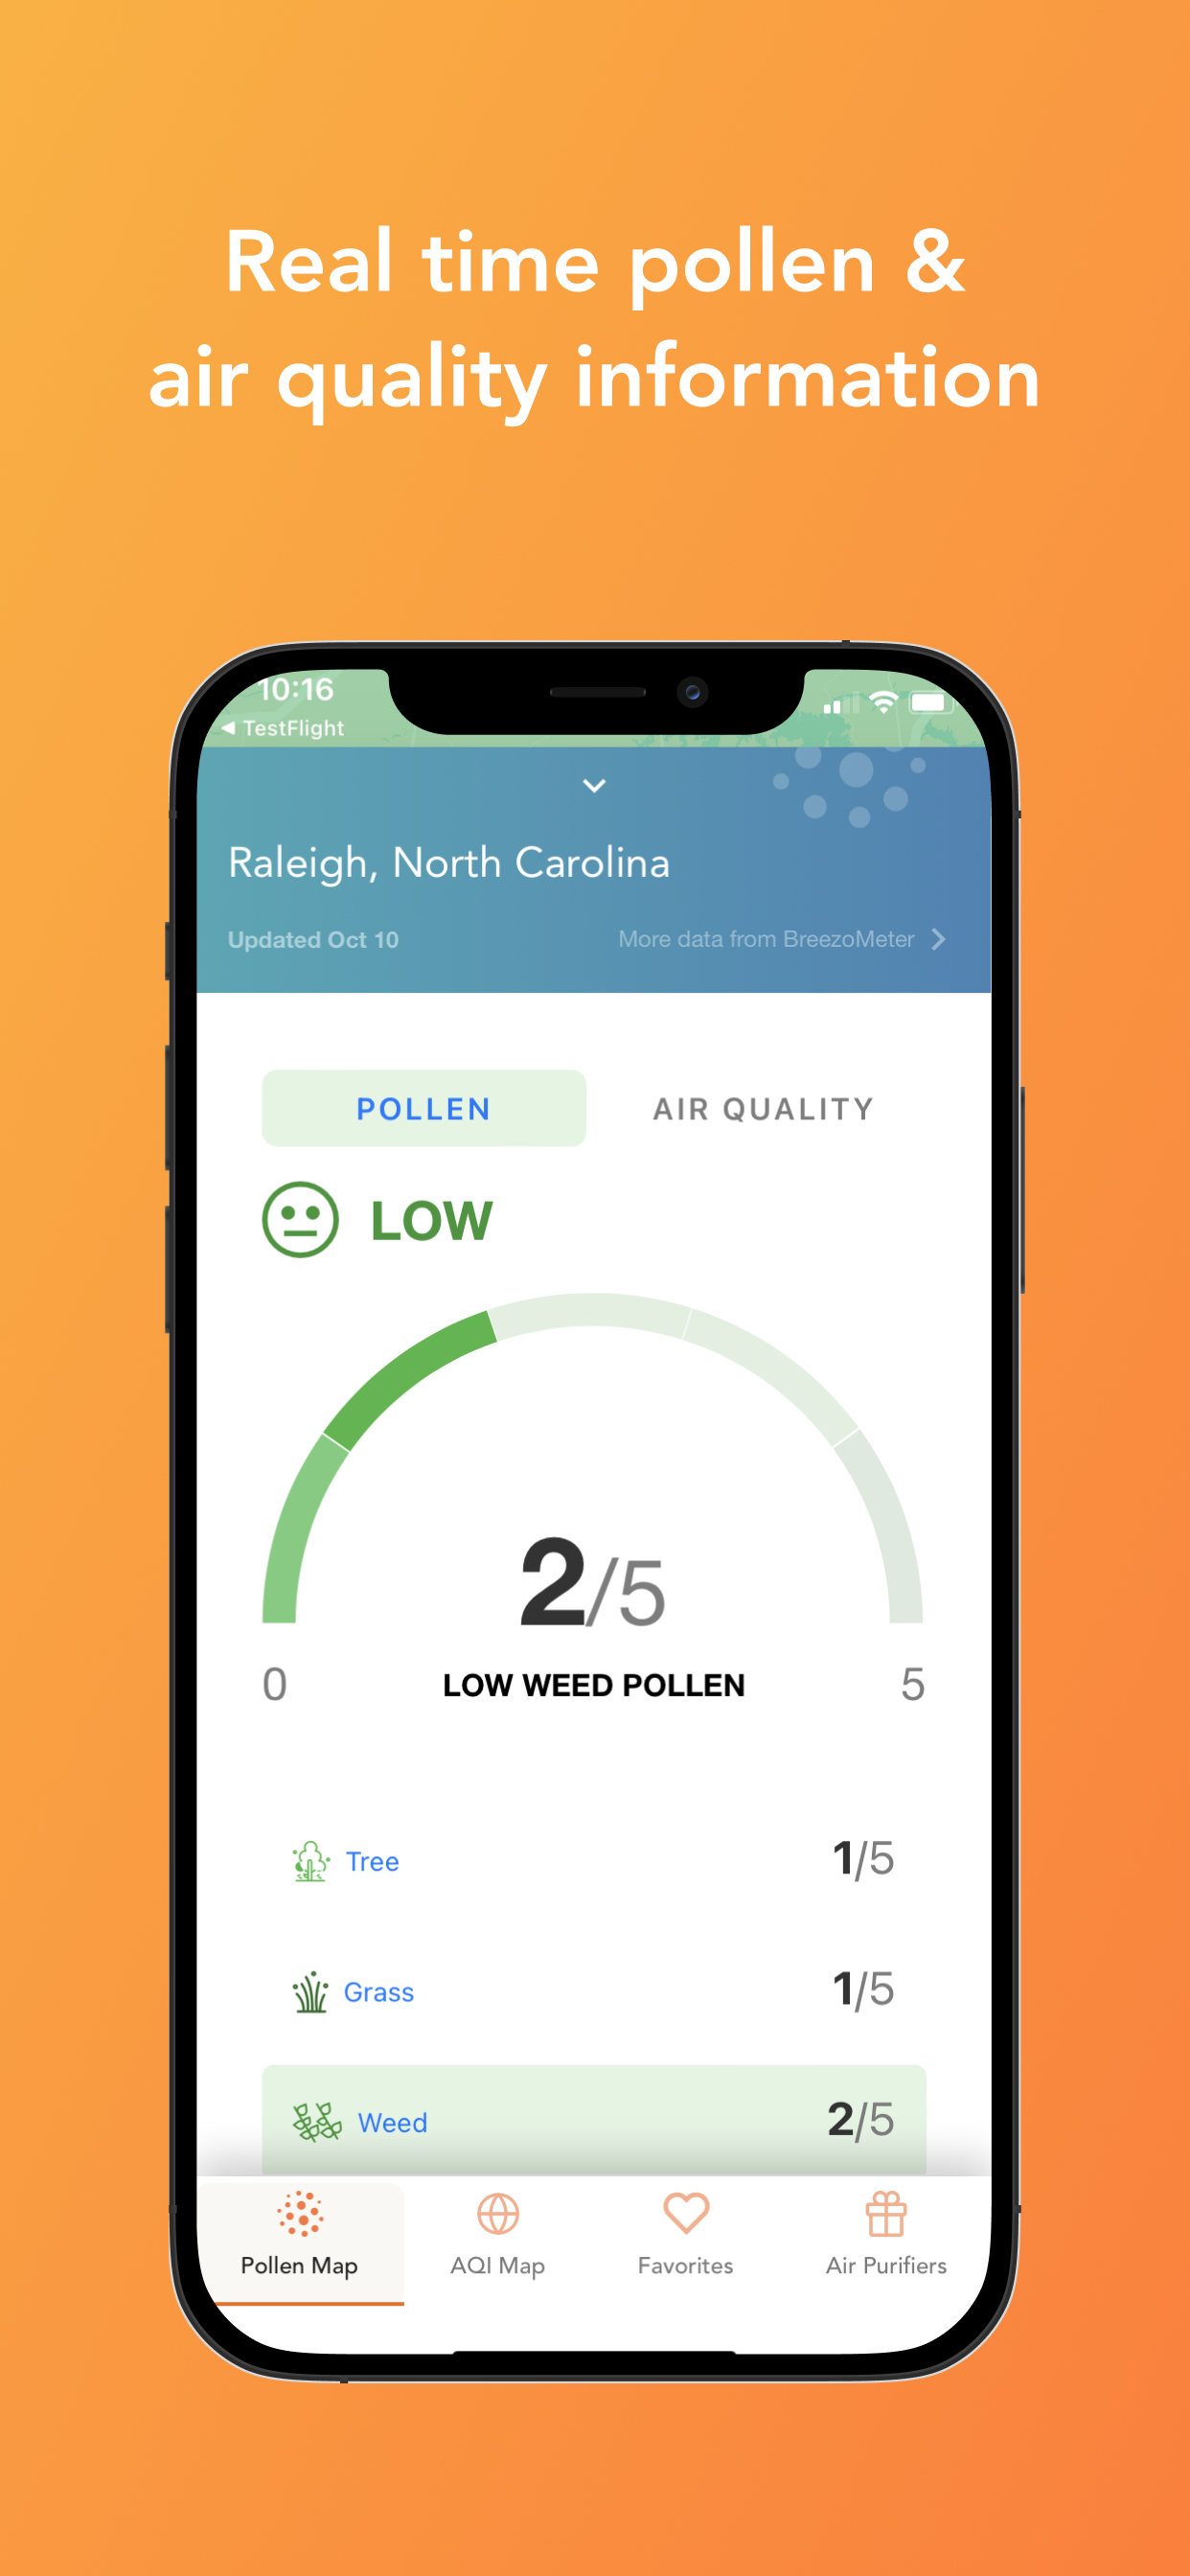 This is highly beneficial to the user, since air quality can change from neighborhood to neighborhood.